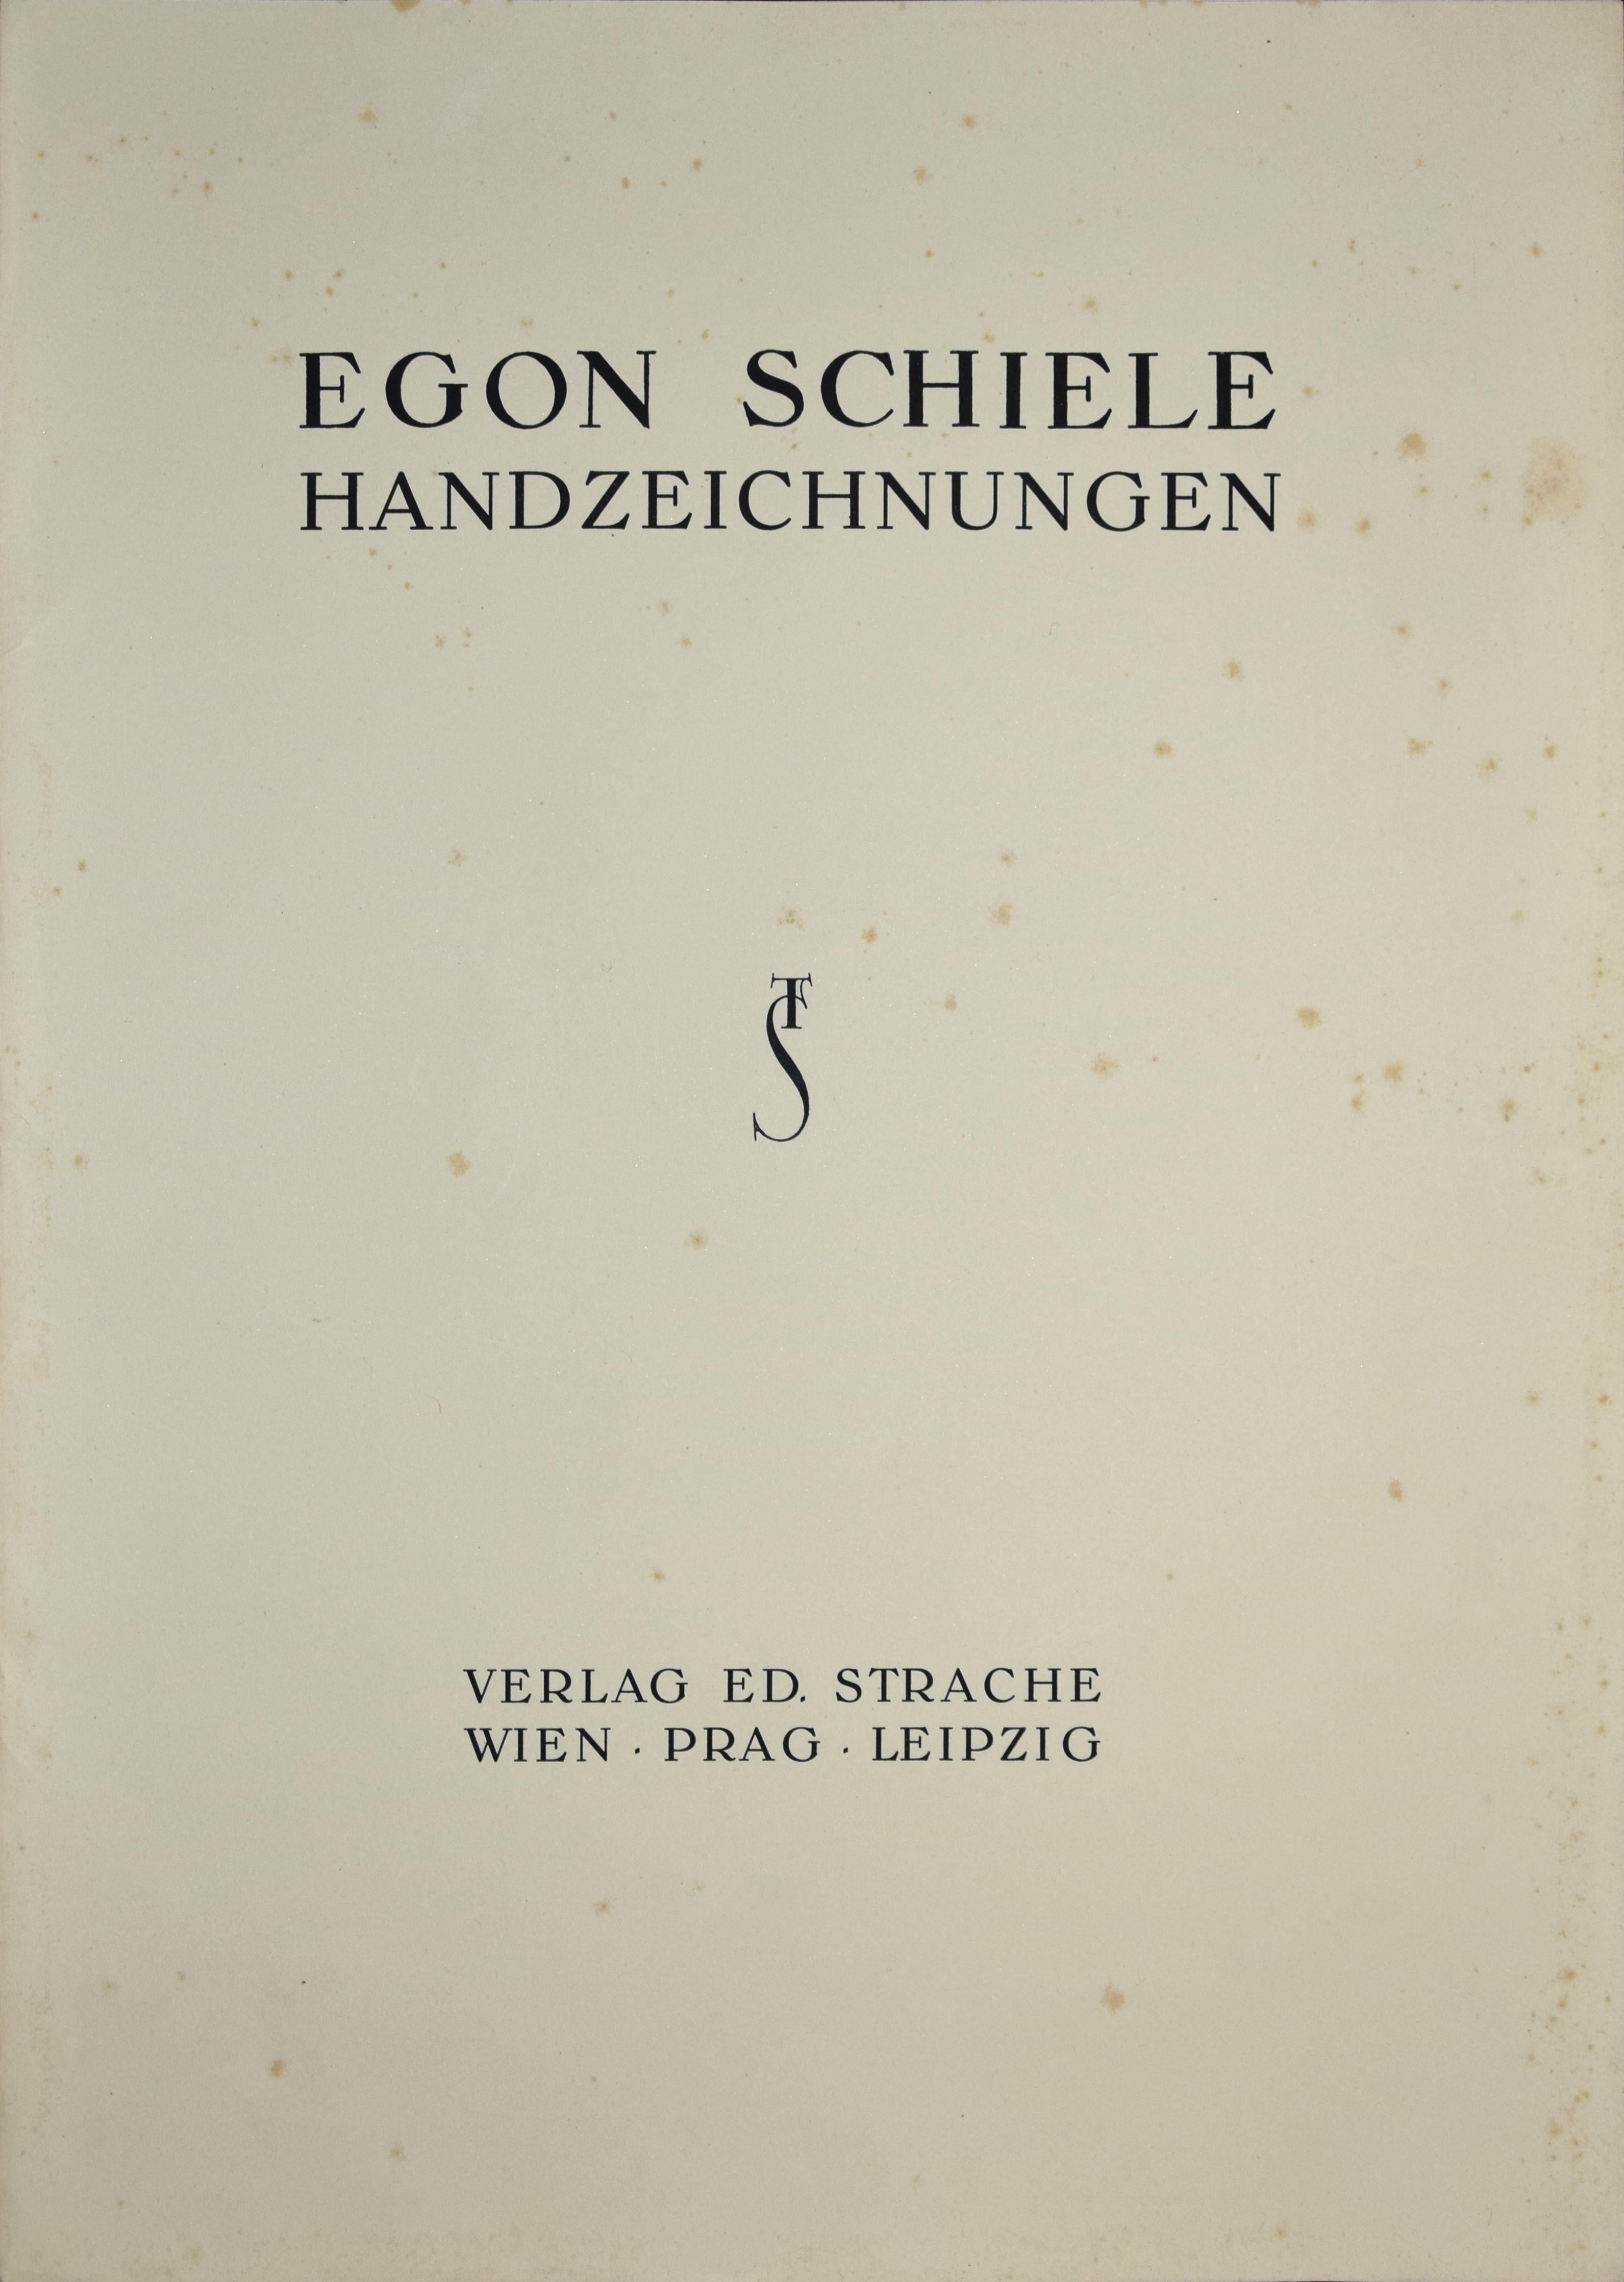 Standing Female Nude is a beautiful black and white collotype from the series Handzeichnungen, a fine art portfolio by Egon Schiele.
The artwork is signed on plate on the lower right margin.

Original Title: Stehender weiblicher Akt.

In excellent